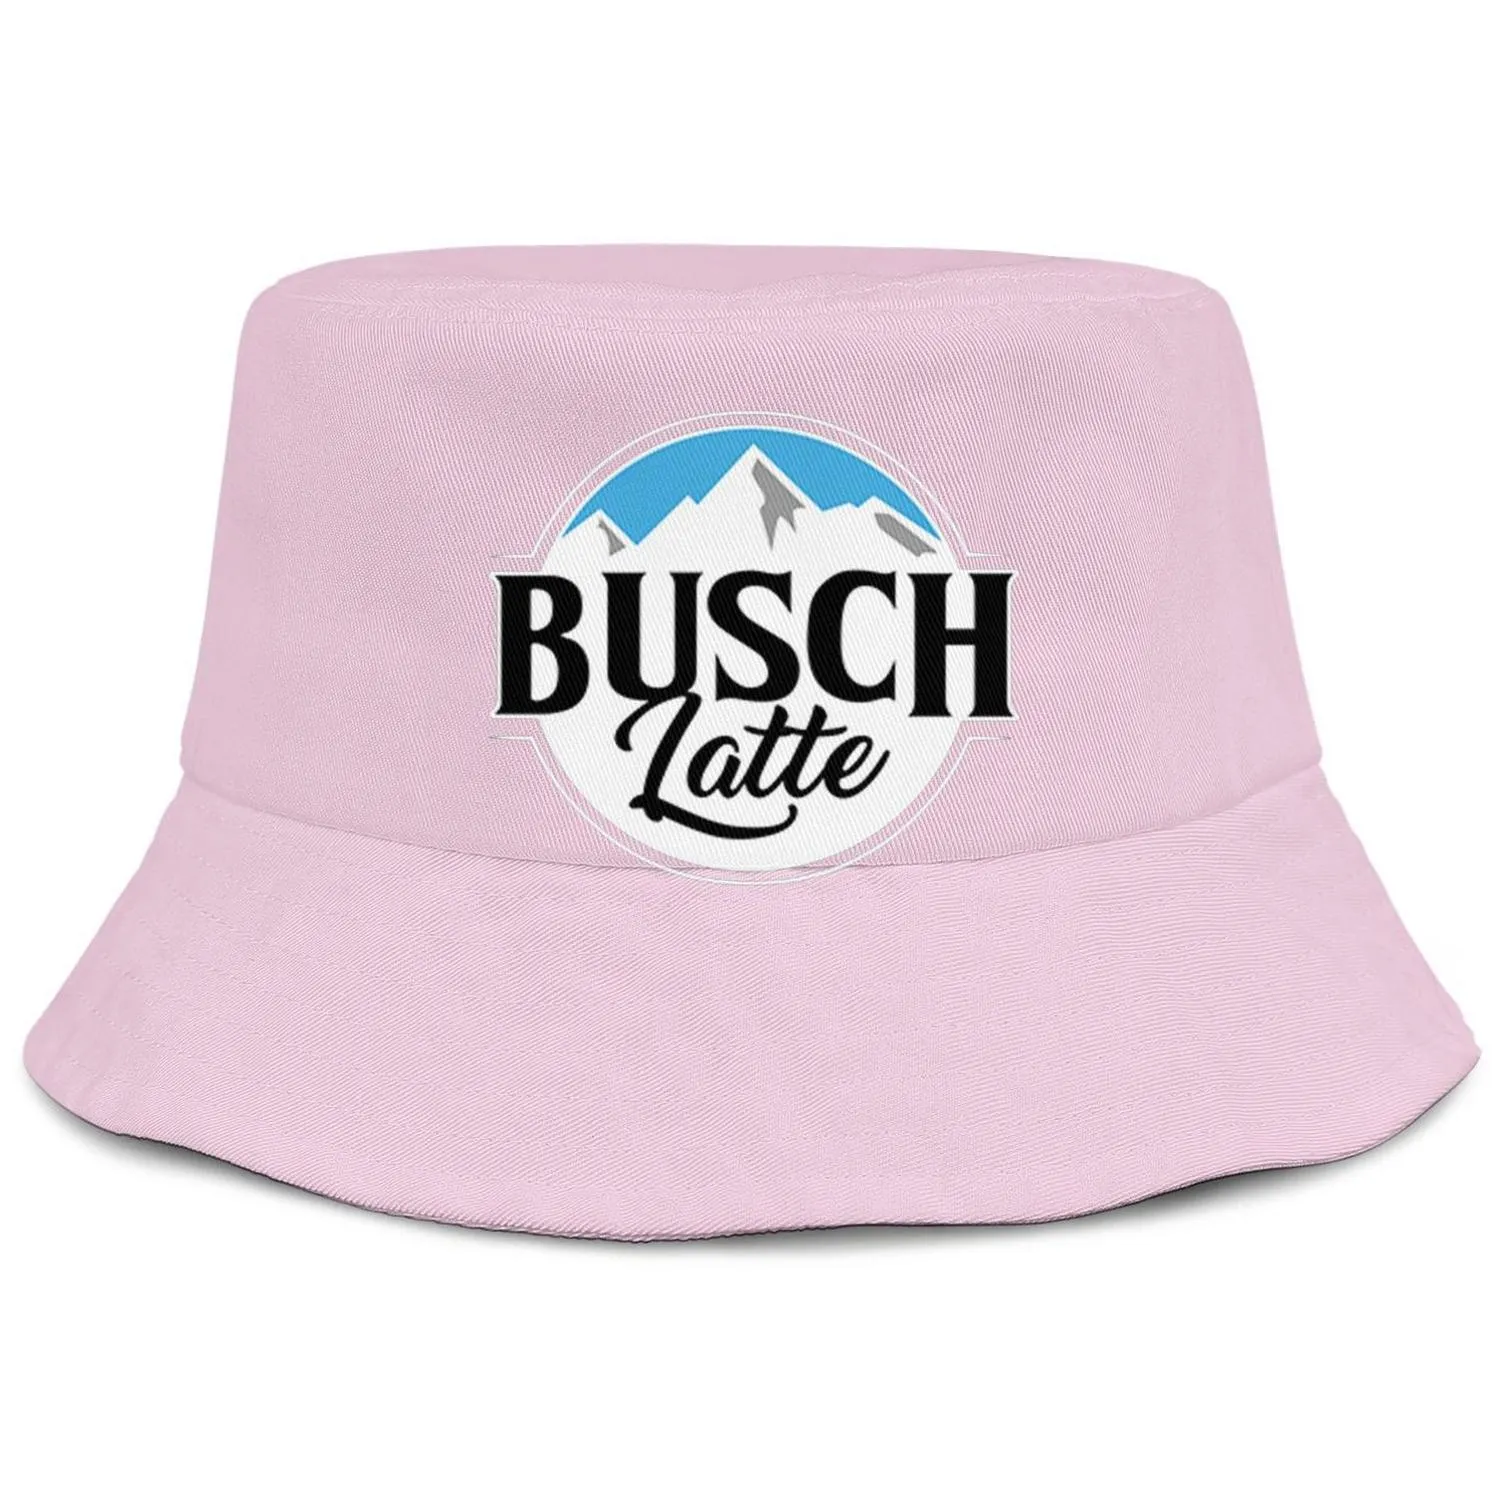 Busch Light Beer logo mens and womens buckethat cool youth bucket baseballcap light blue adge white Latte So Much7948772